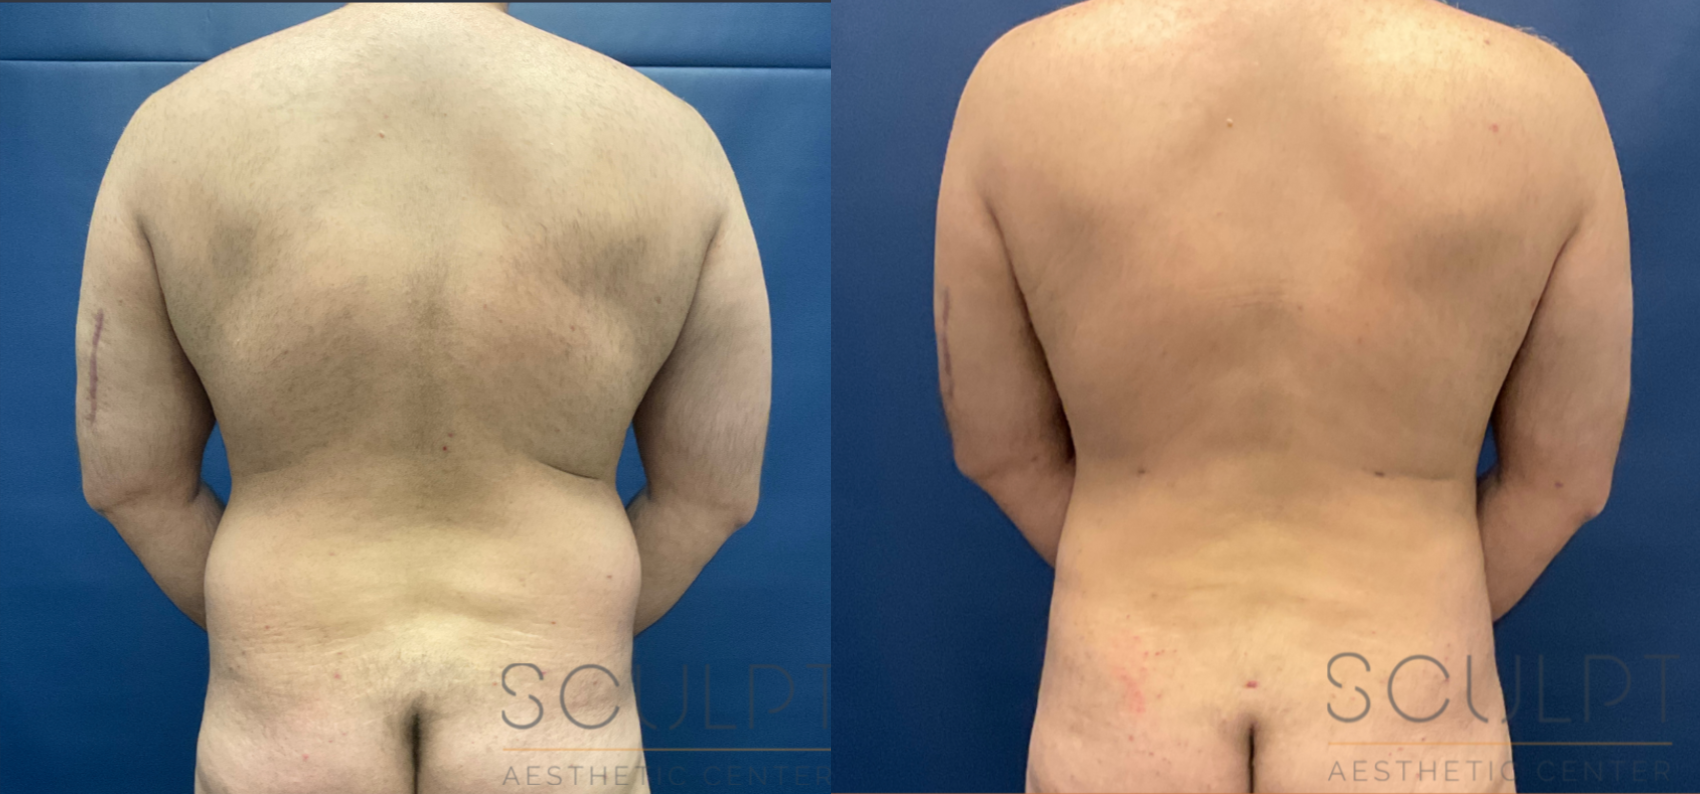 Male Liposuction Before & After Sculpcenter